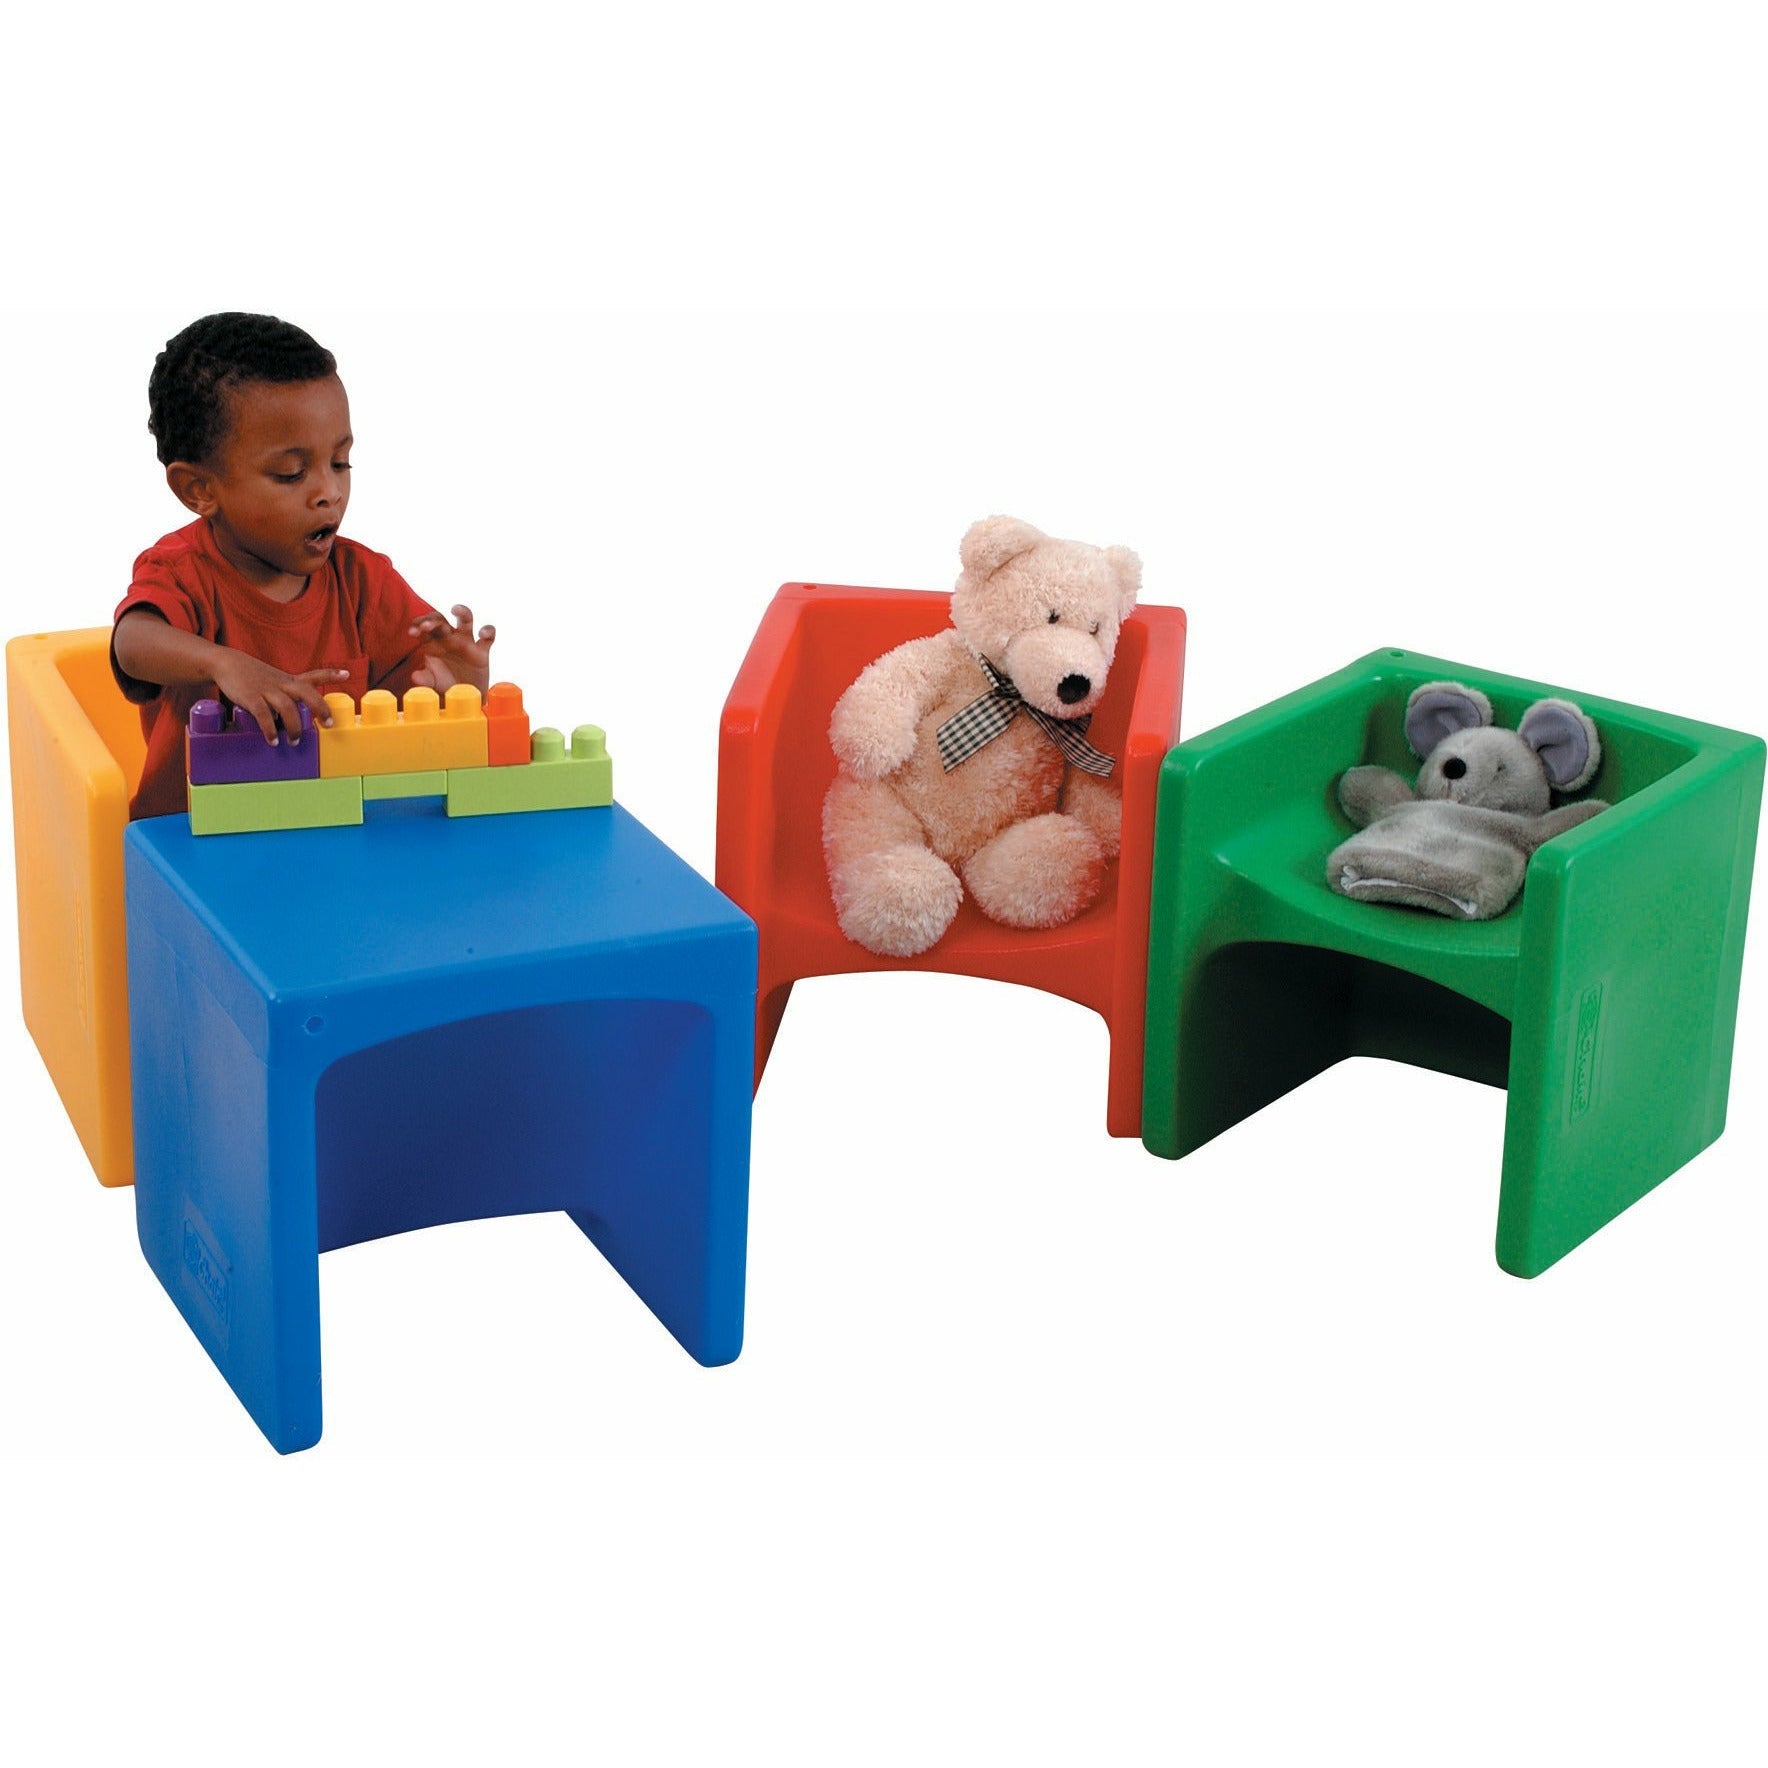 Chair Cube, Set of 4 Primary Colors